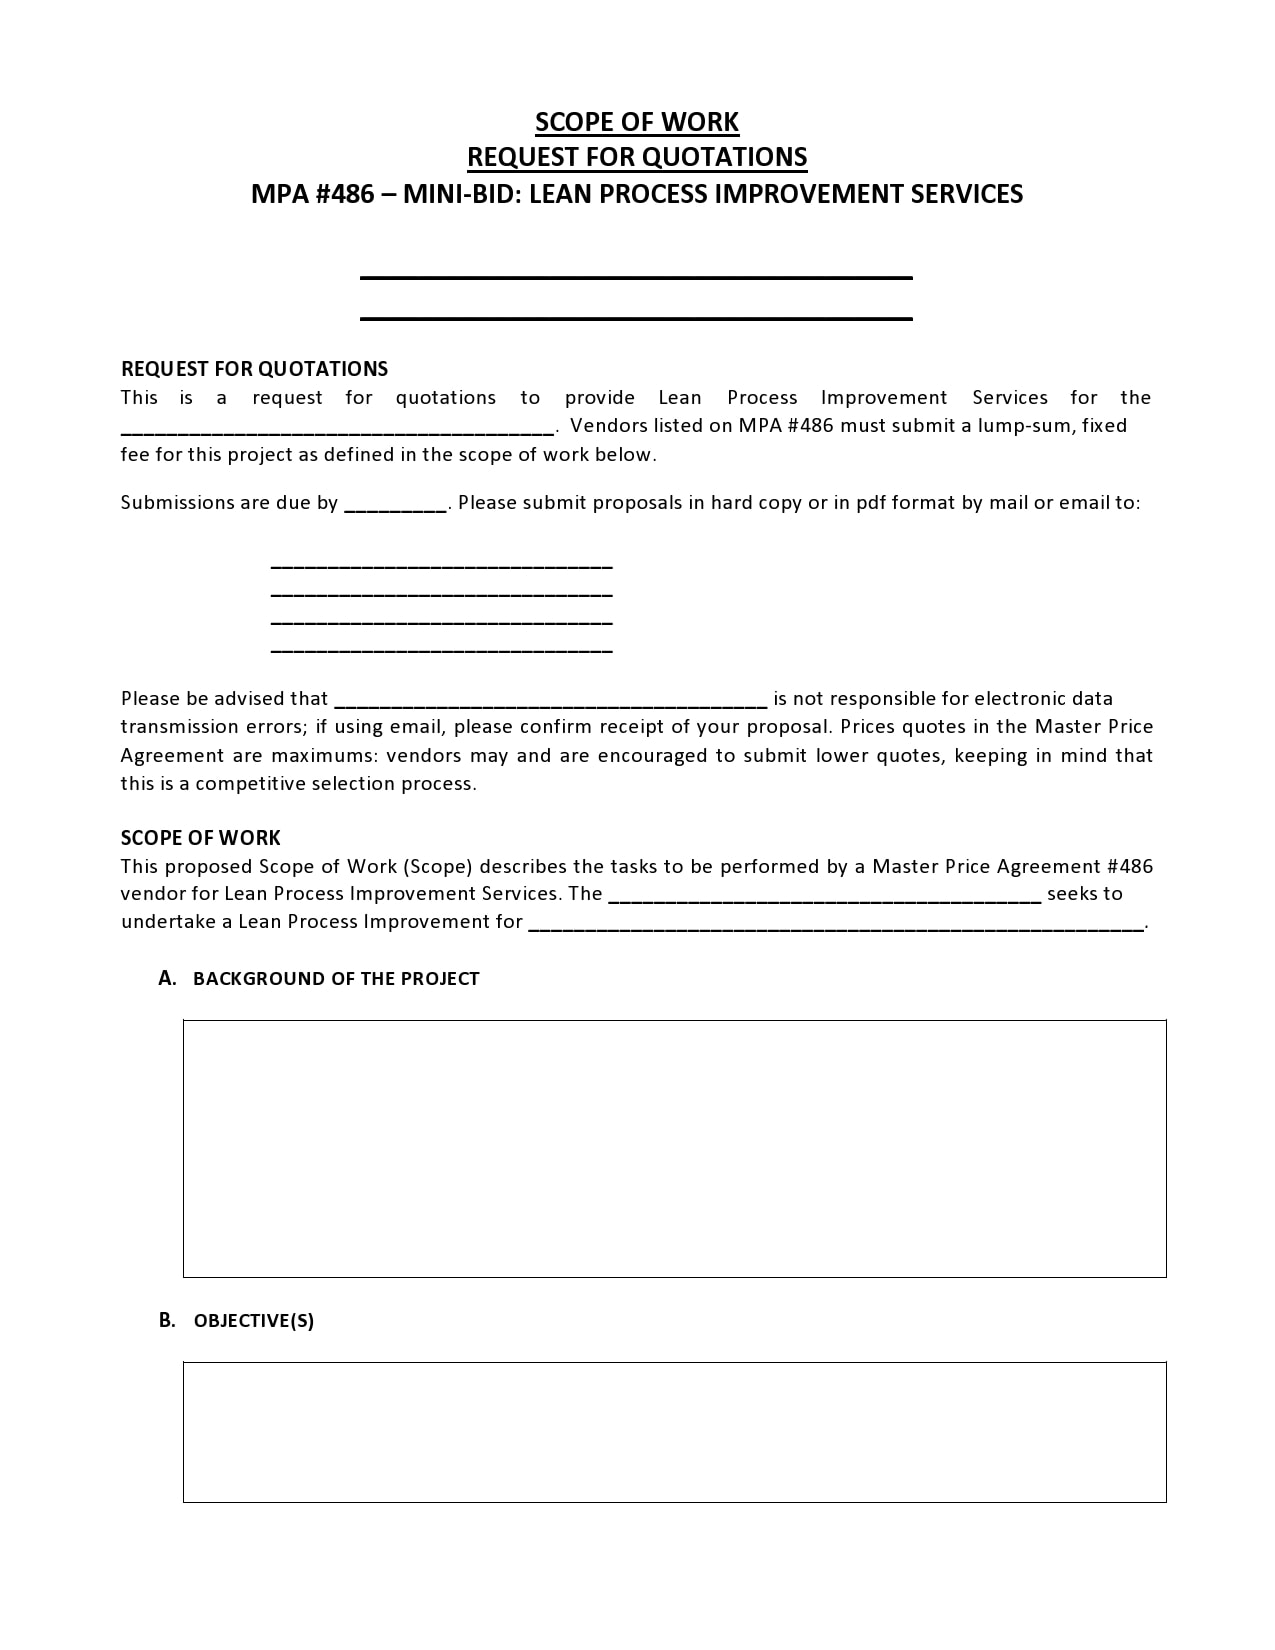 22 Simple Scope Of Work Templates (& Examples) Within scope of work agreement template